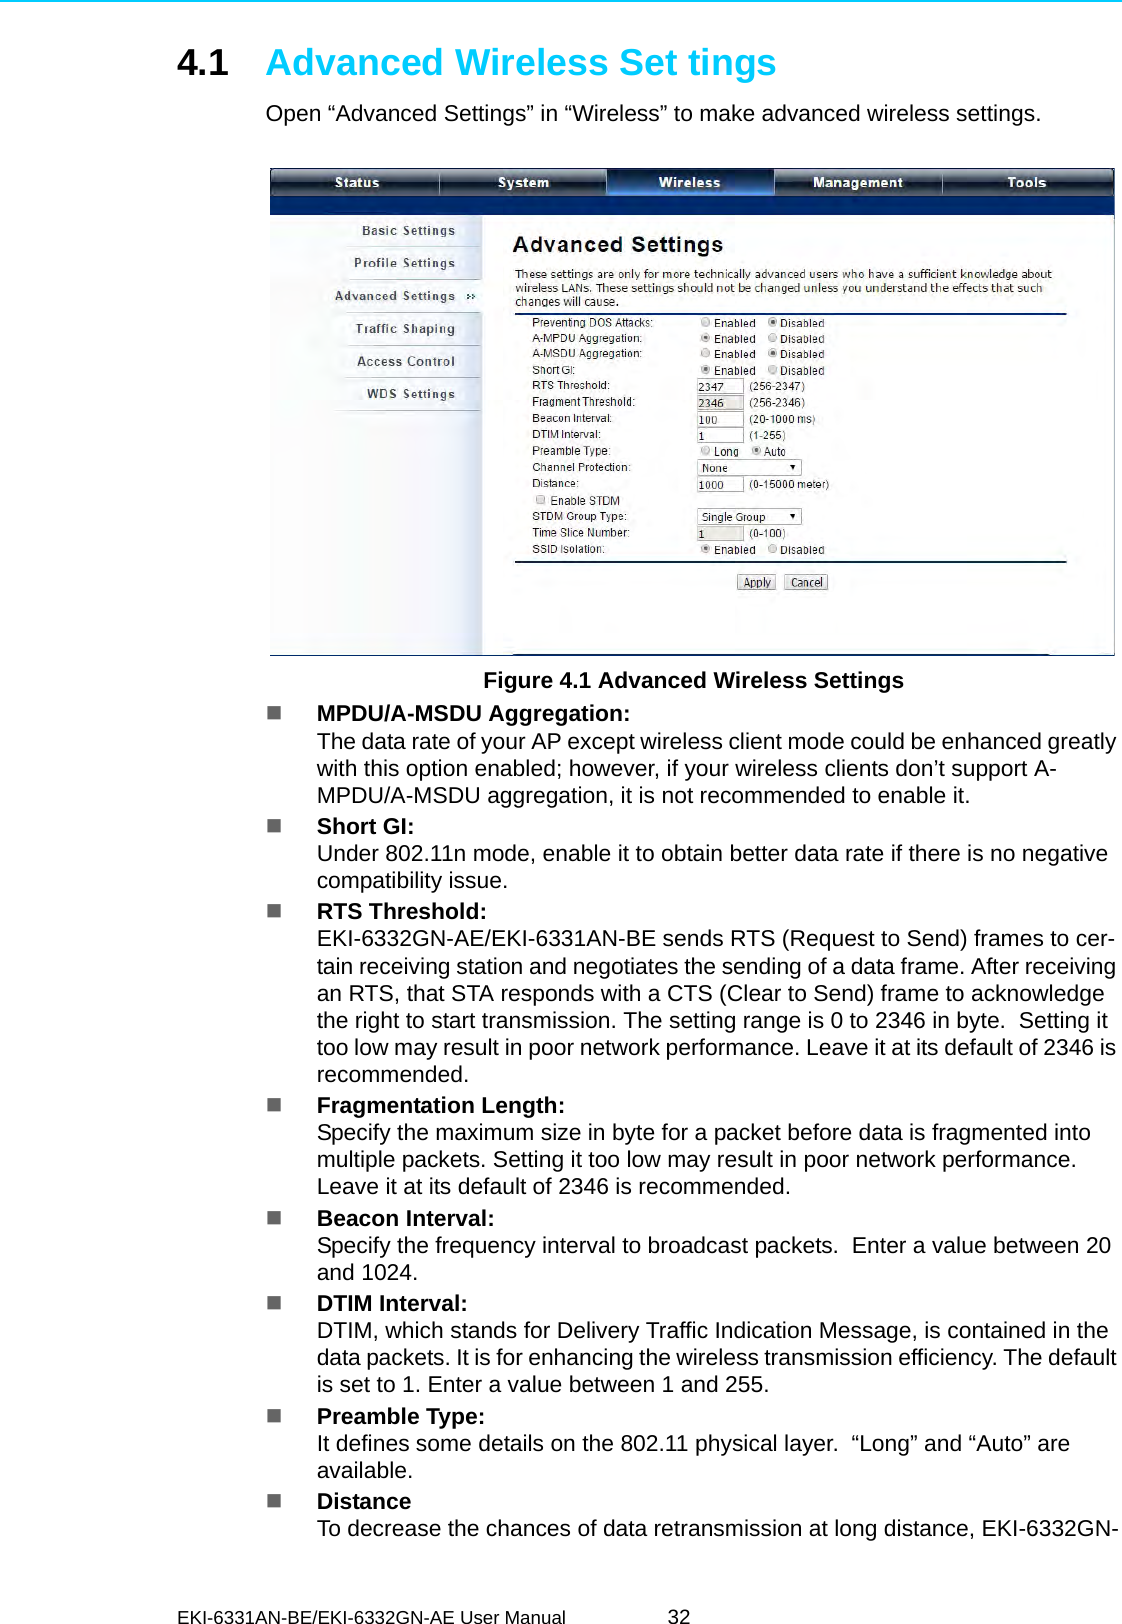 EKI-6331AN-BE/EKI-6332GN-AE User Manual 324.1 Advanced Wireless Set tingsOpen “Advanced Settings” in “Wireless” to make advanced wireless settings. Figure 4.1 Advanced Wireless SettingsMPDU/A-MSDU Aggregation:The data rate of your AP except wireless client mode could be enhanced greatly with this option enabled; however, if your wireless clients don’t support A-MPDU/A-MSDU aggregation, it is not recommended to enable it.Short GI:Under 802.11n mode, enable it to obtain better data rate if there is no negative compatibility issue.RTS Threshold:EKI-6332GN-AE/EKI-6331AN-BE sends RTS (Request to Send) frames to cer-tain receiving station and negotiates the sending of a data frame. After receiving an RTS, that STA responds with a CTS (Clear to Send) frame to acknowledge the right to start transmission. The setting range is 0 to 2346 in byte.  Setting it too low may result in poor network performance. Leave it at its default of 2346 is recommended.Fragmentation Length:Specify the maximum size in byte for a packet before data is fragmented into multiple packets. Setting it too low may result in poor network performance. Leave it at its default of 2346 is recommended.Beacon Interval:Specify the frequency interval to broadcast packets.  Enter a value between 20 and 1024.DTIM Interval:DTIM, which stands for Delivery Traffic Indication Message, is contained in the data packets. It is for enhancing the wireless transmission efficiency. The default is set to 1. Enter a value between 1 and 255.Preamble Type:It defines some details on the 802.11 physical layer.  “Long” and “Auto” are available.DistanceTo decrease the chances of data retransmission at long distance, EKI-6332GN-